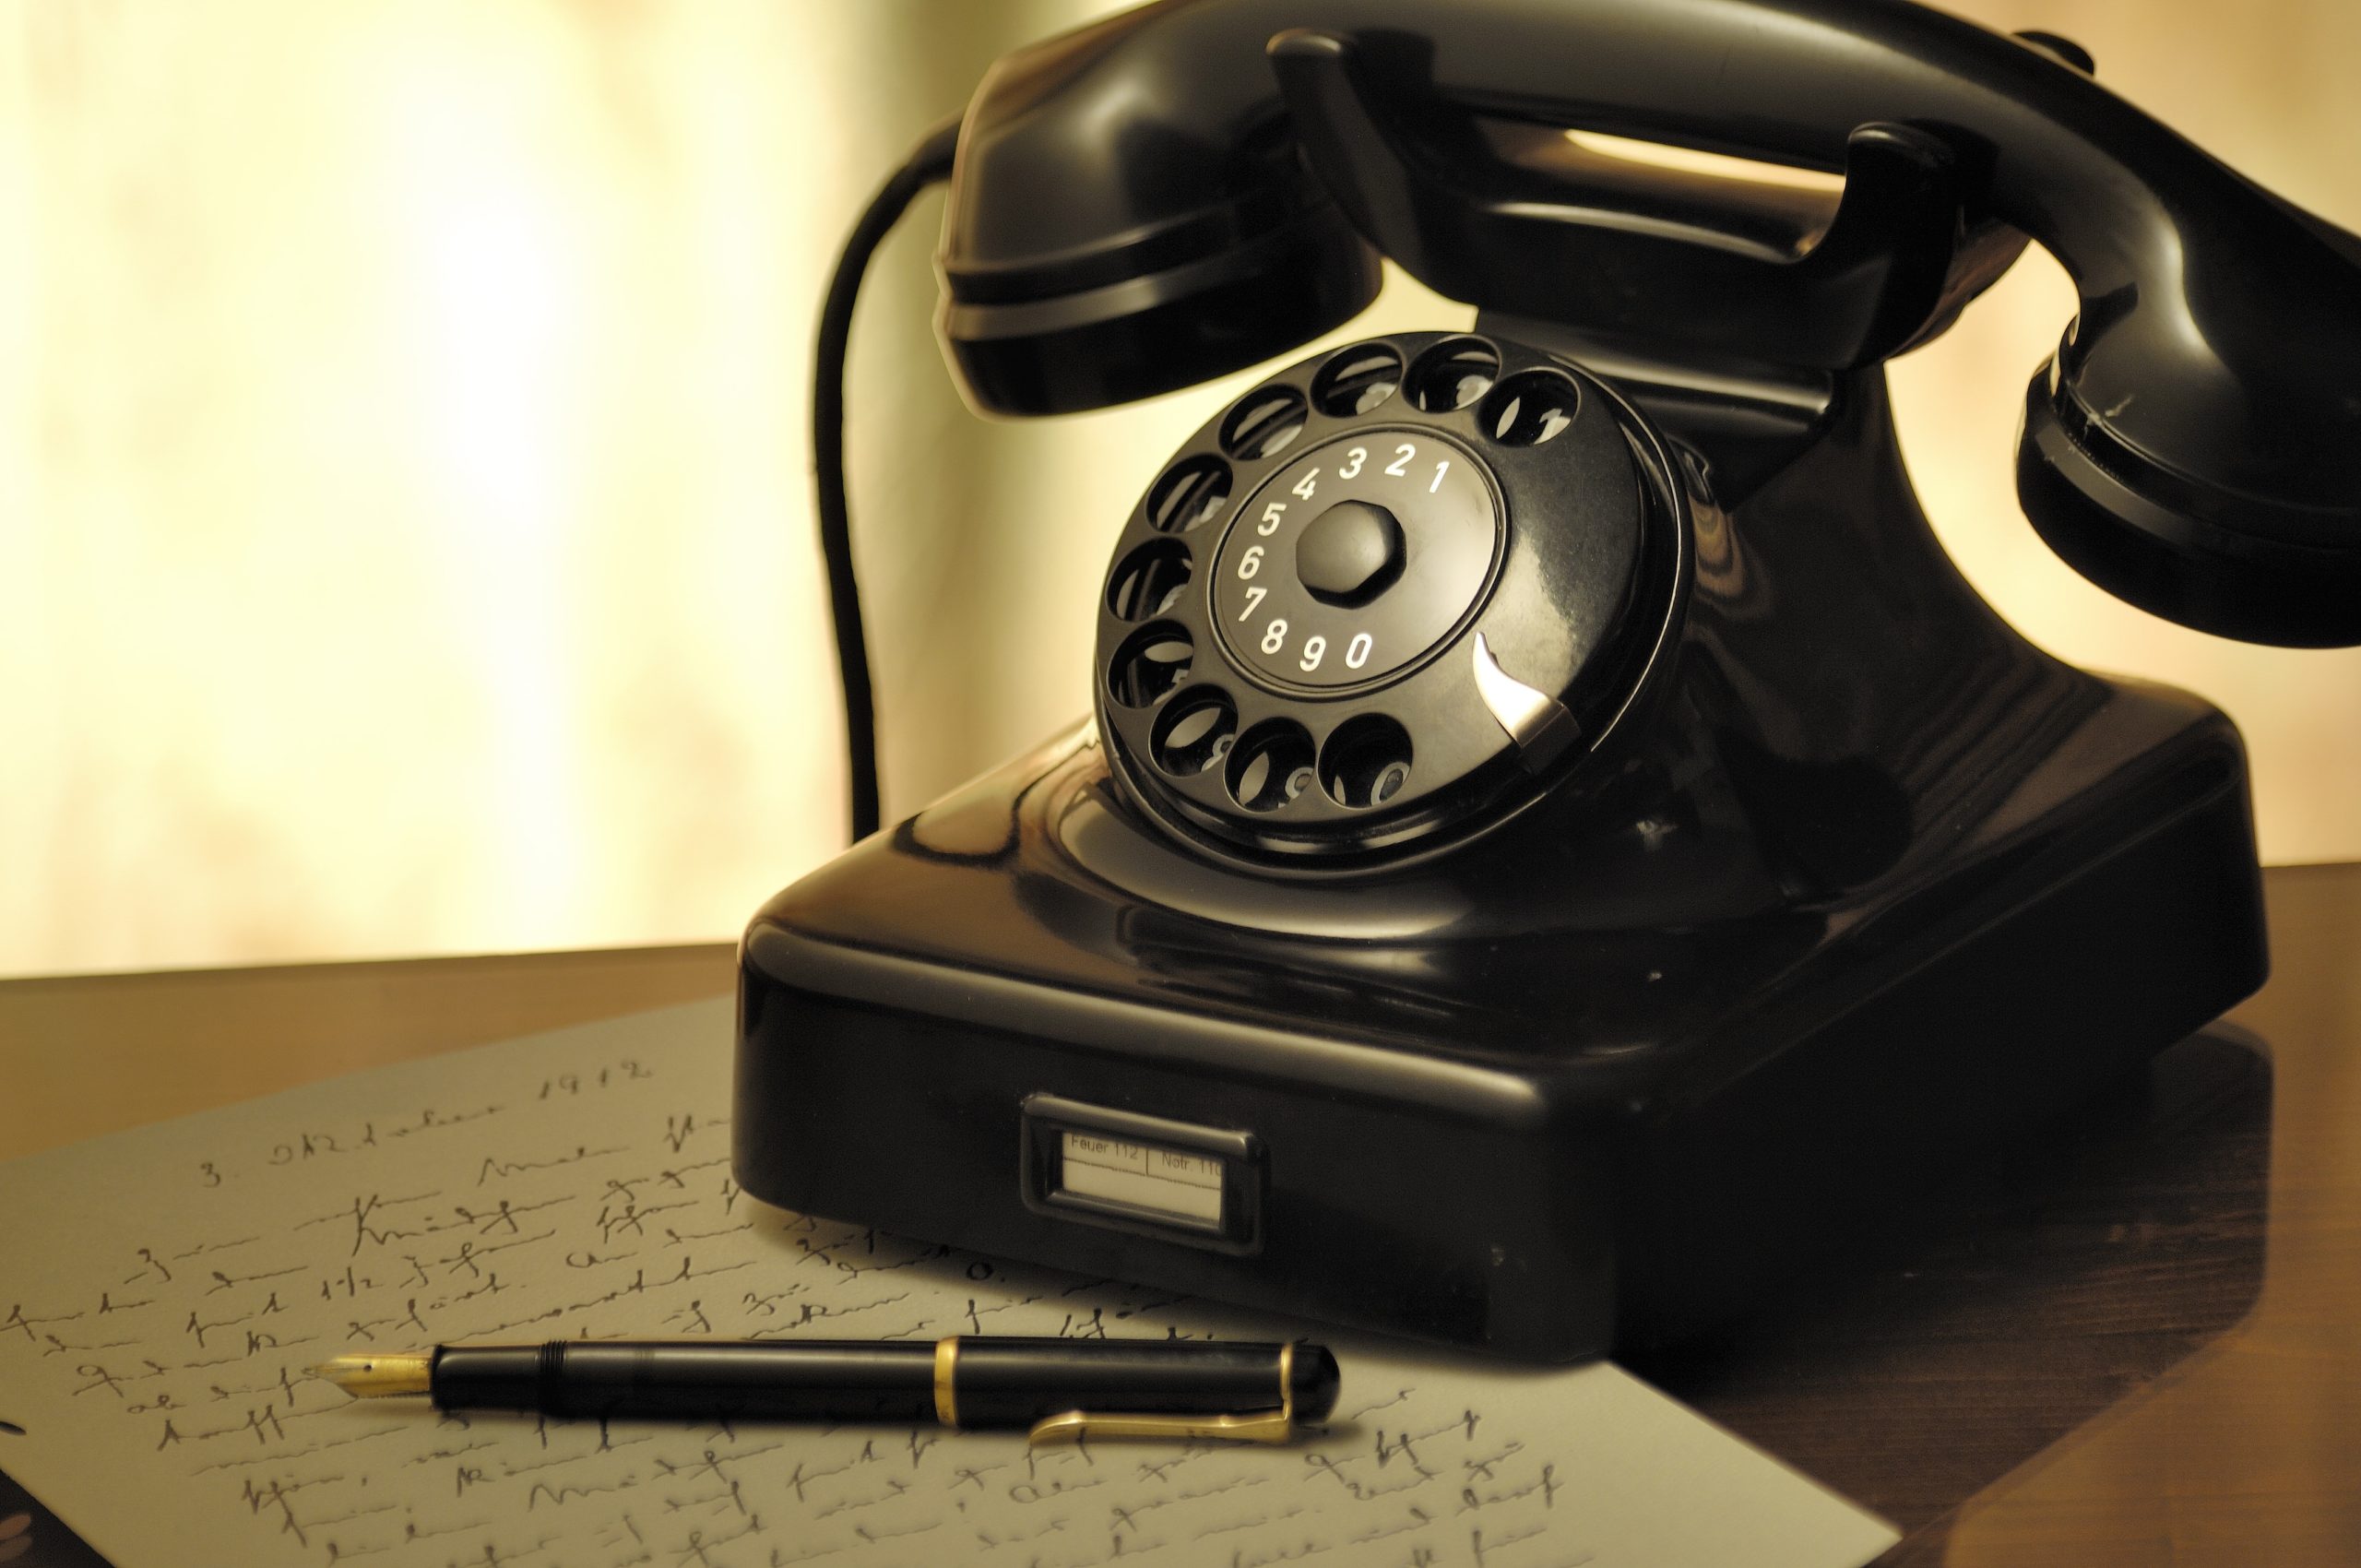 An old-fashioned rotary telephone sits on a table alongside a sheet of paper and a pen.